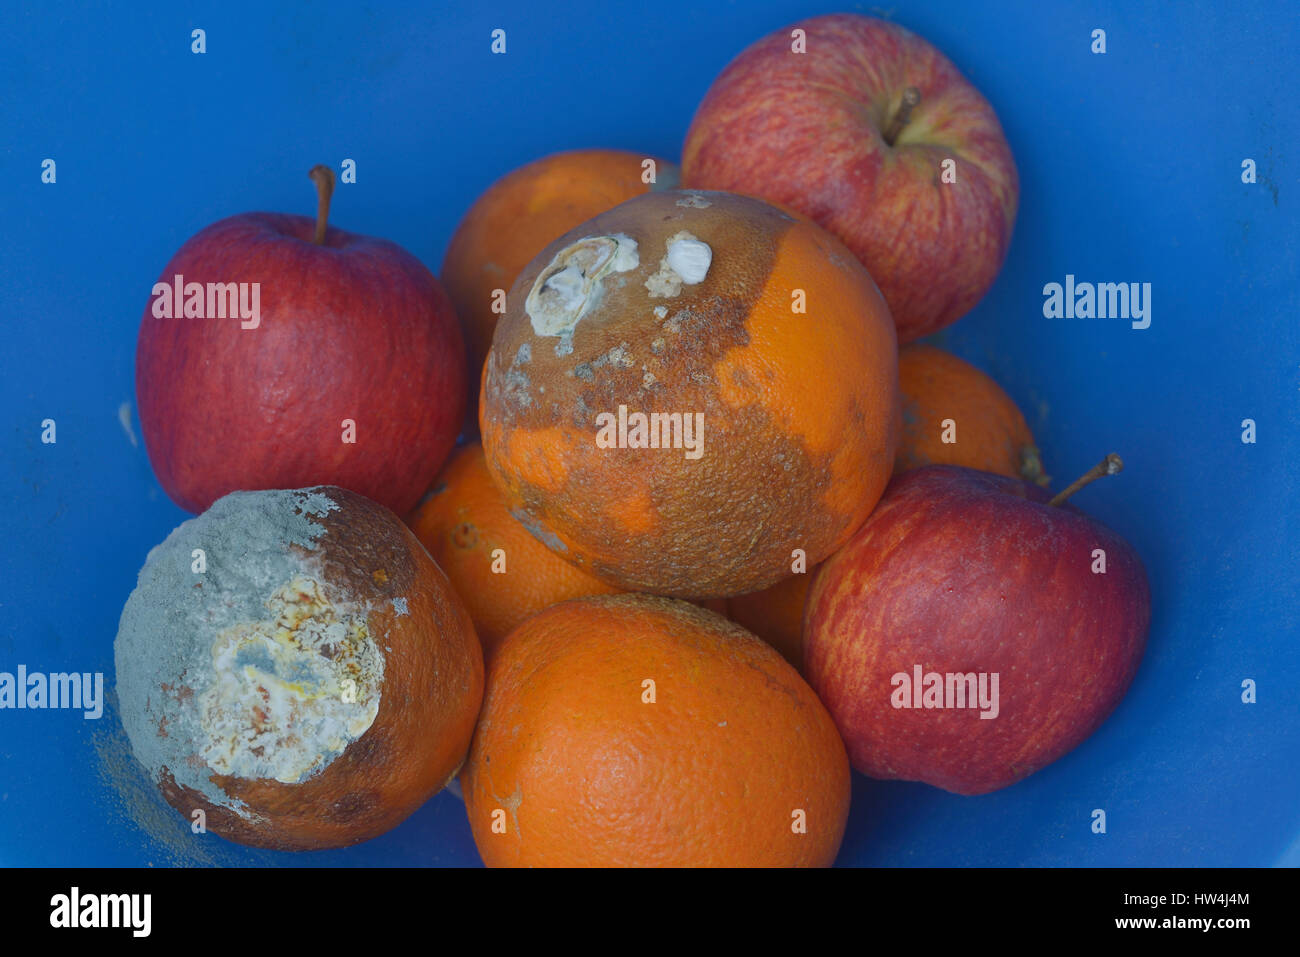 Rotten oranges and apples in a fruit bowl Stock Photo